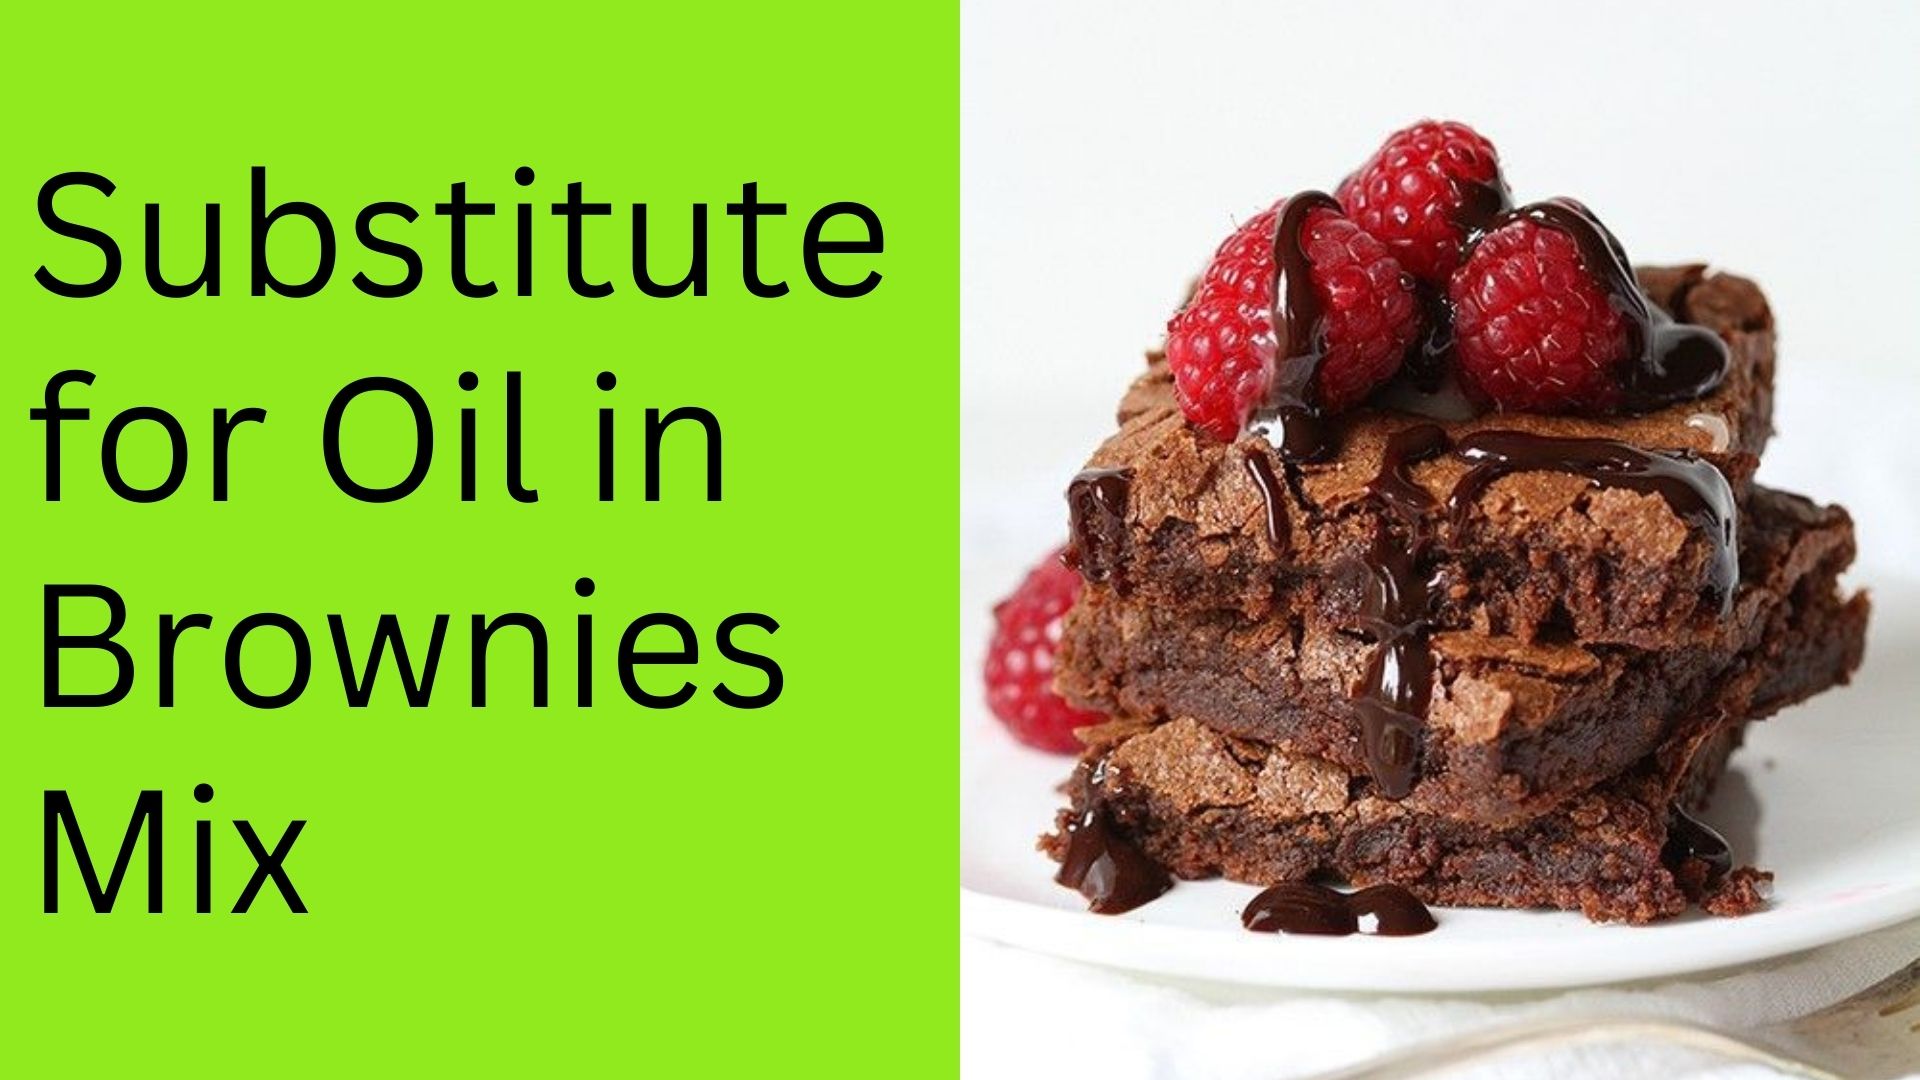 Substitute for Oil in Brownies Mix